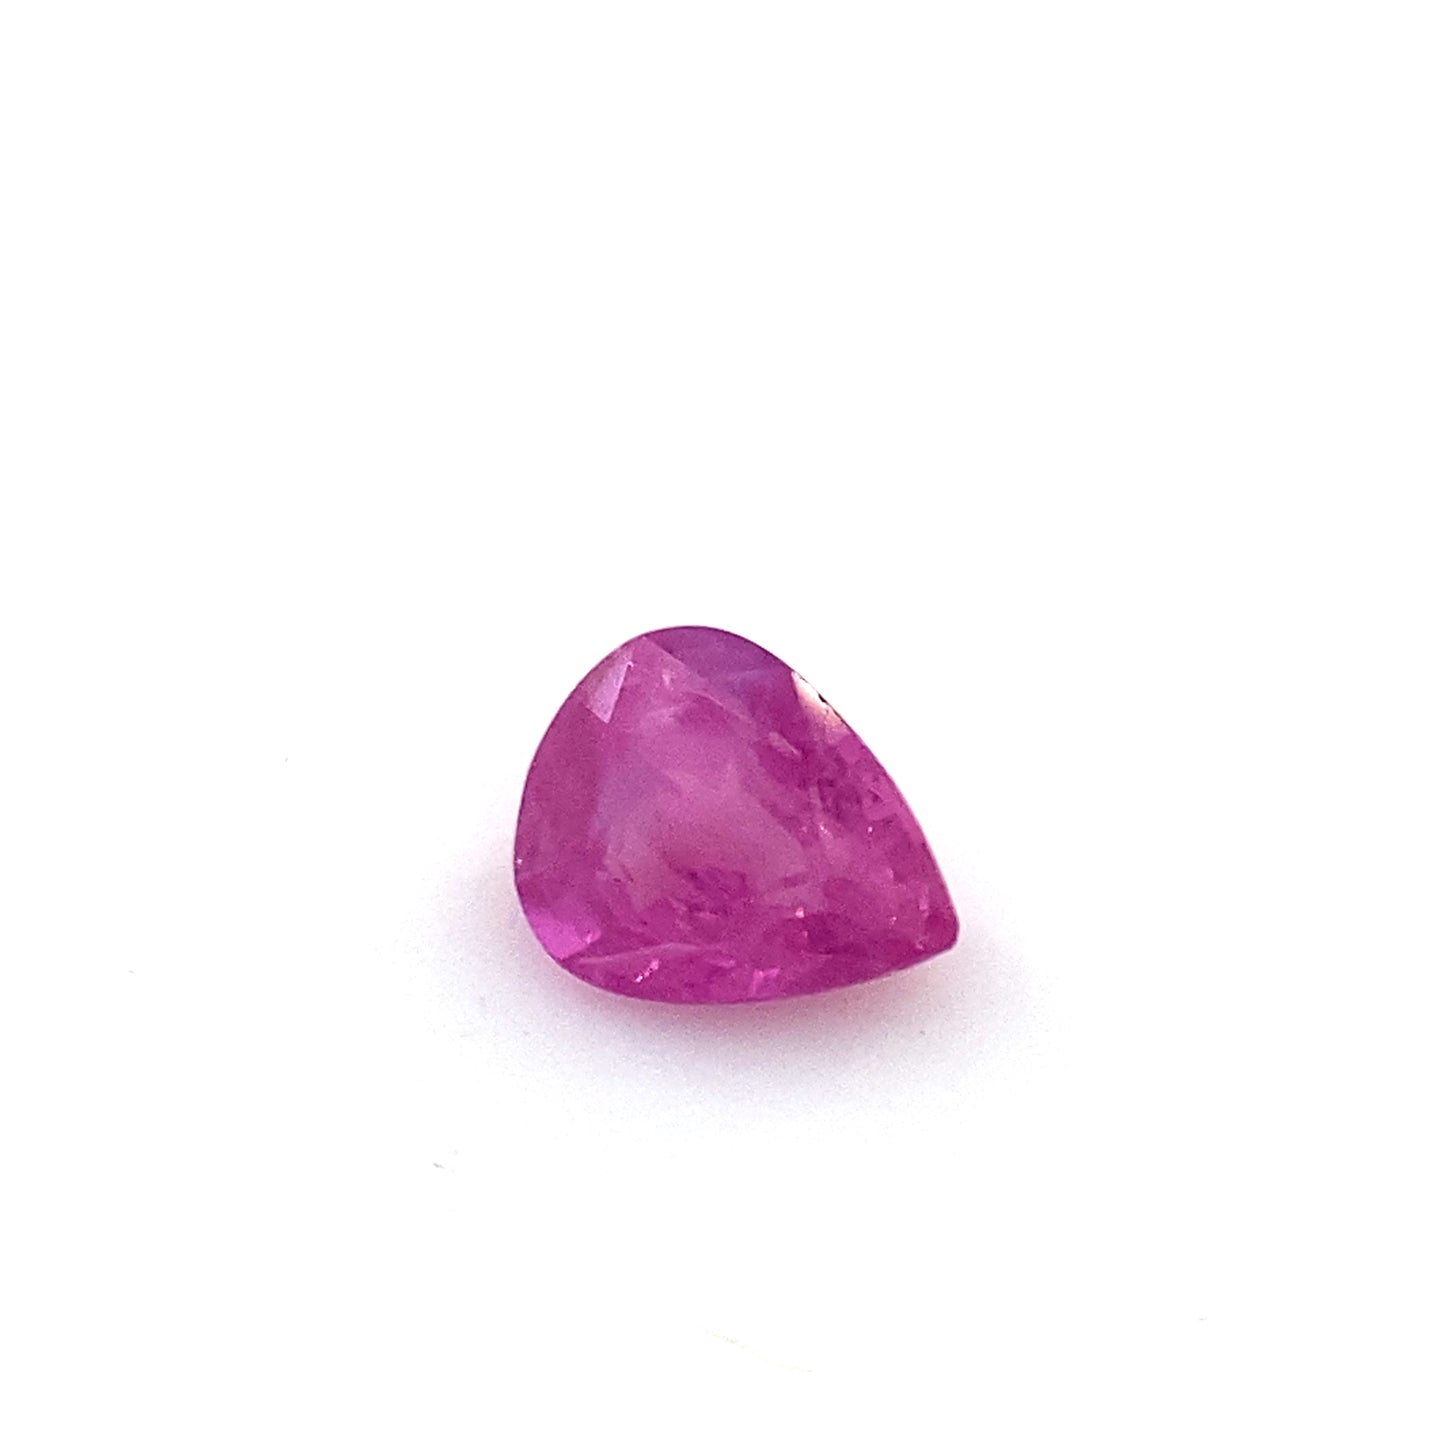 LOOSE STONE / Drop cut pink sapphire of 0.47ct / Total value 8900 pesos